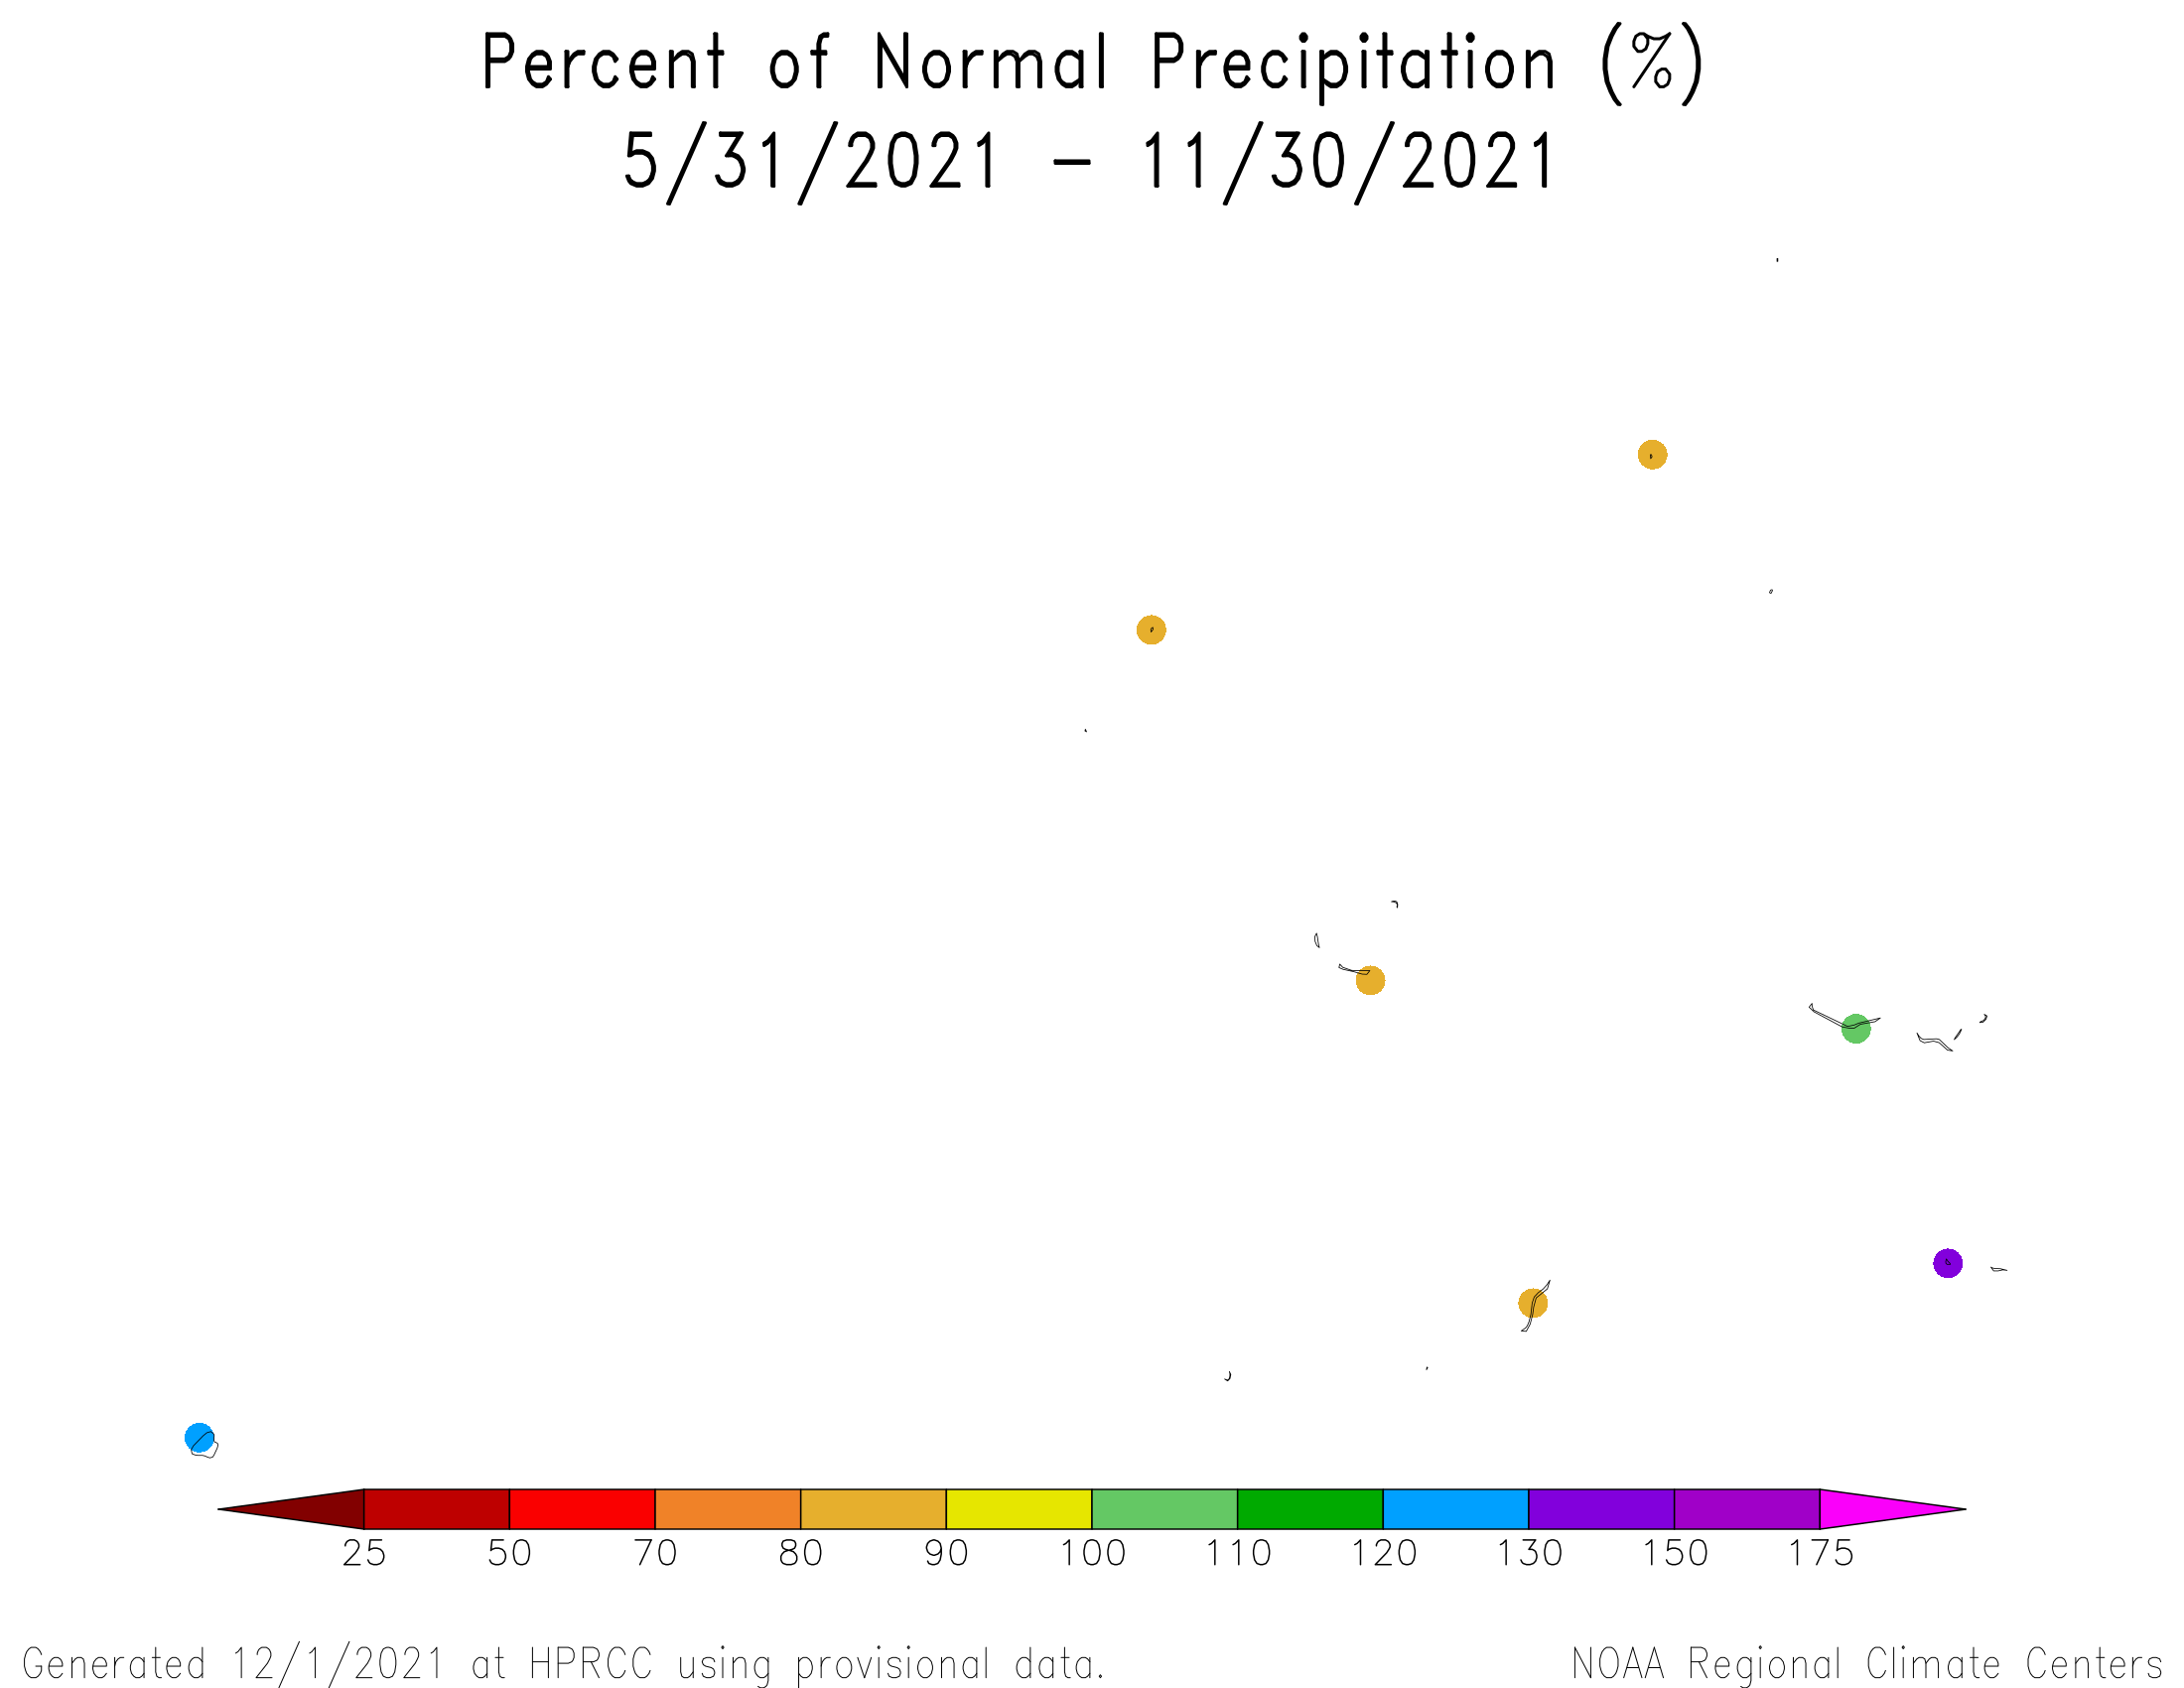 6-month Percent of Normal Precipitation for the Marshall Islands